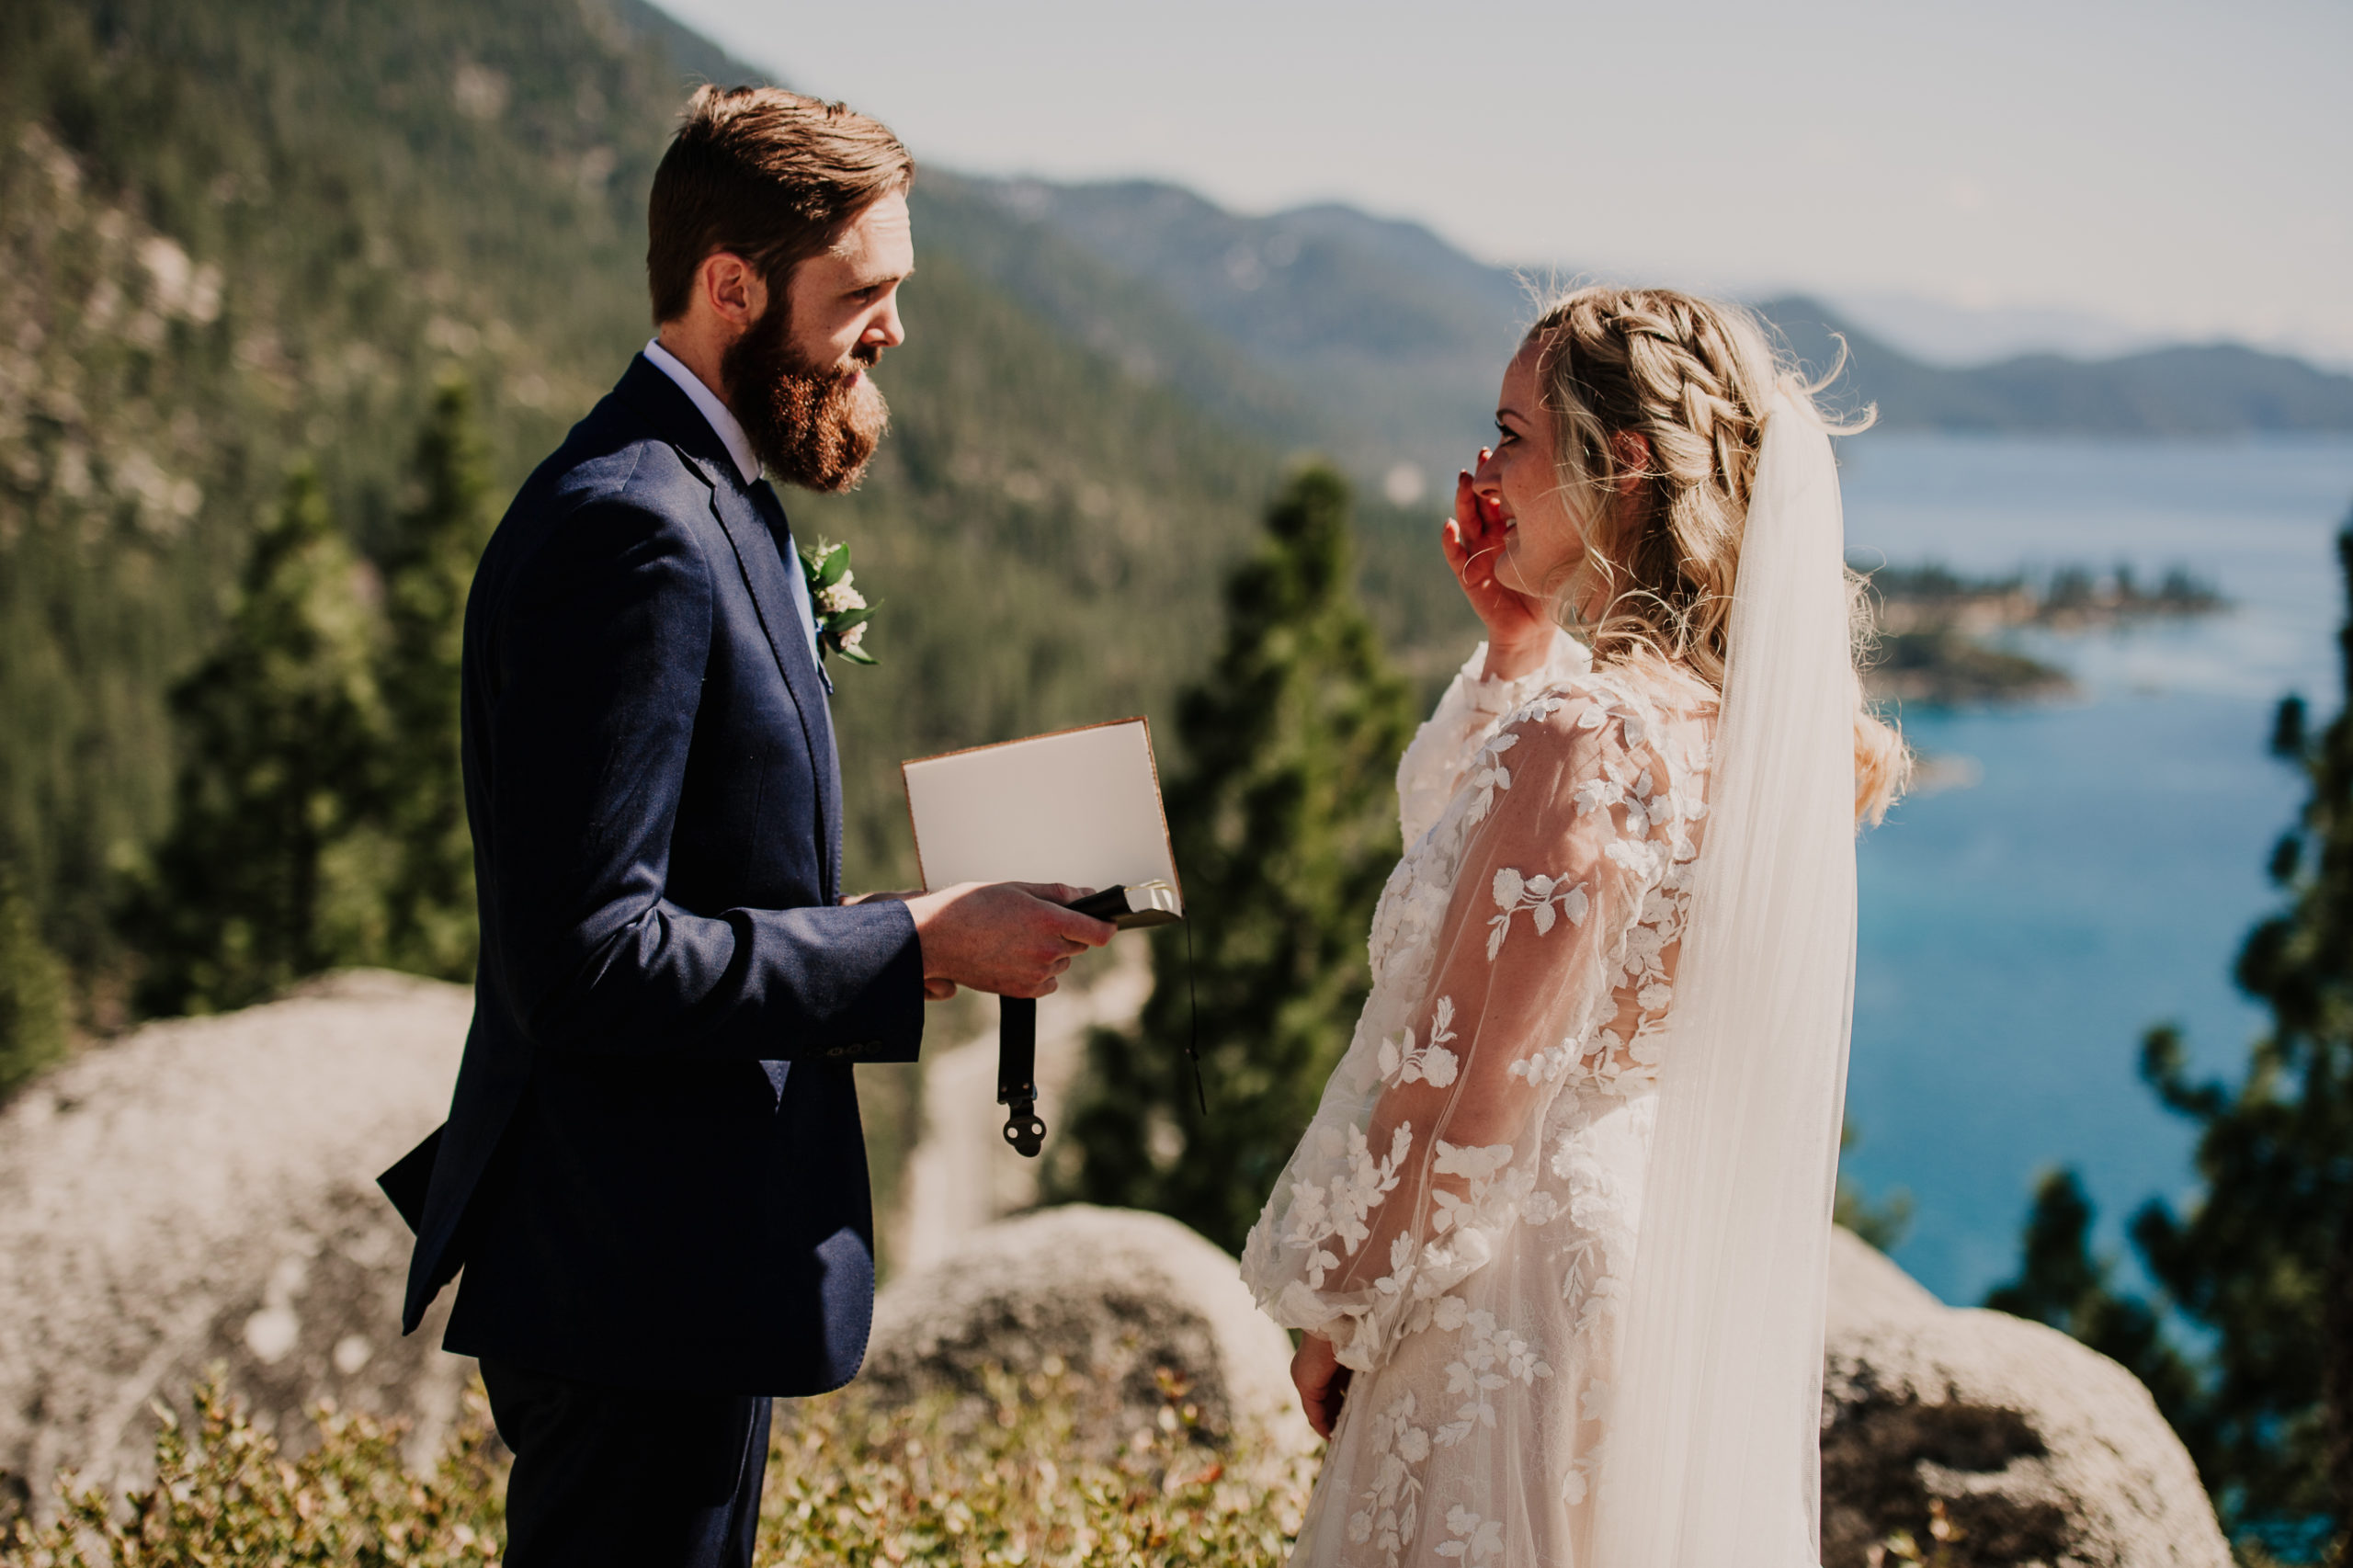 downsizing to an intimate wedding and keeping it special. where to elope in lake tahoe